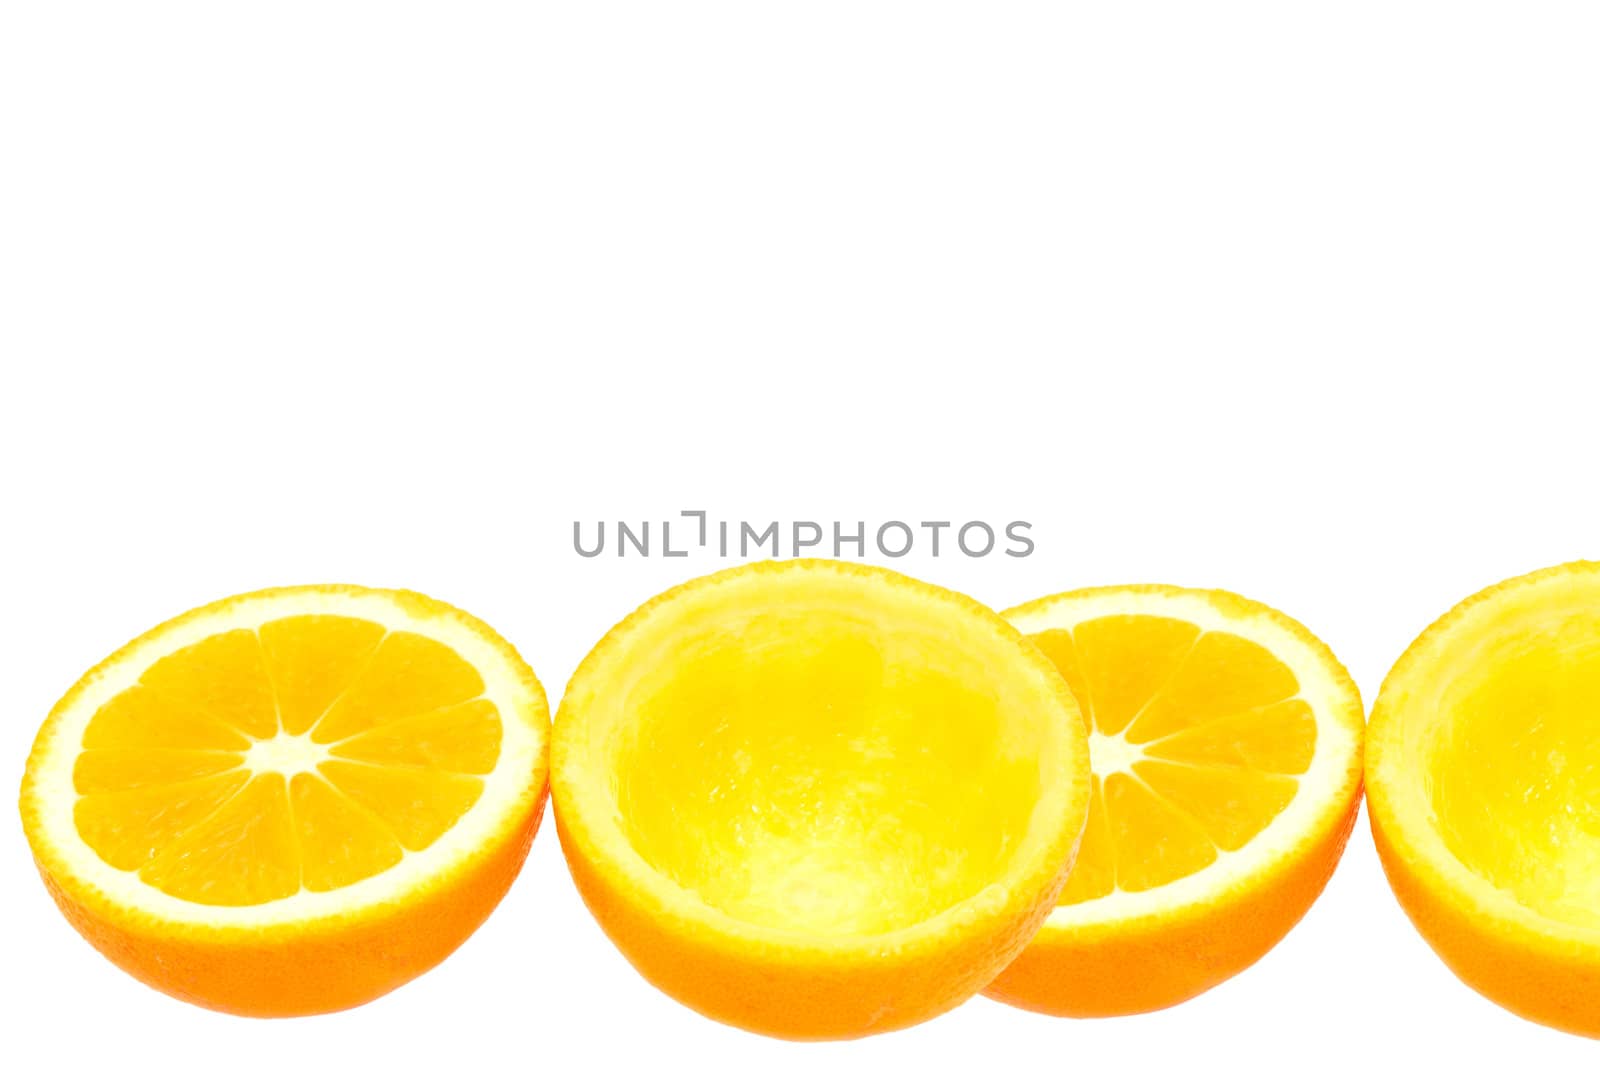 squeezed orange halves without squeezing, isolated on white background with space for writing text